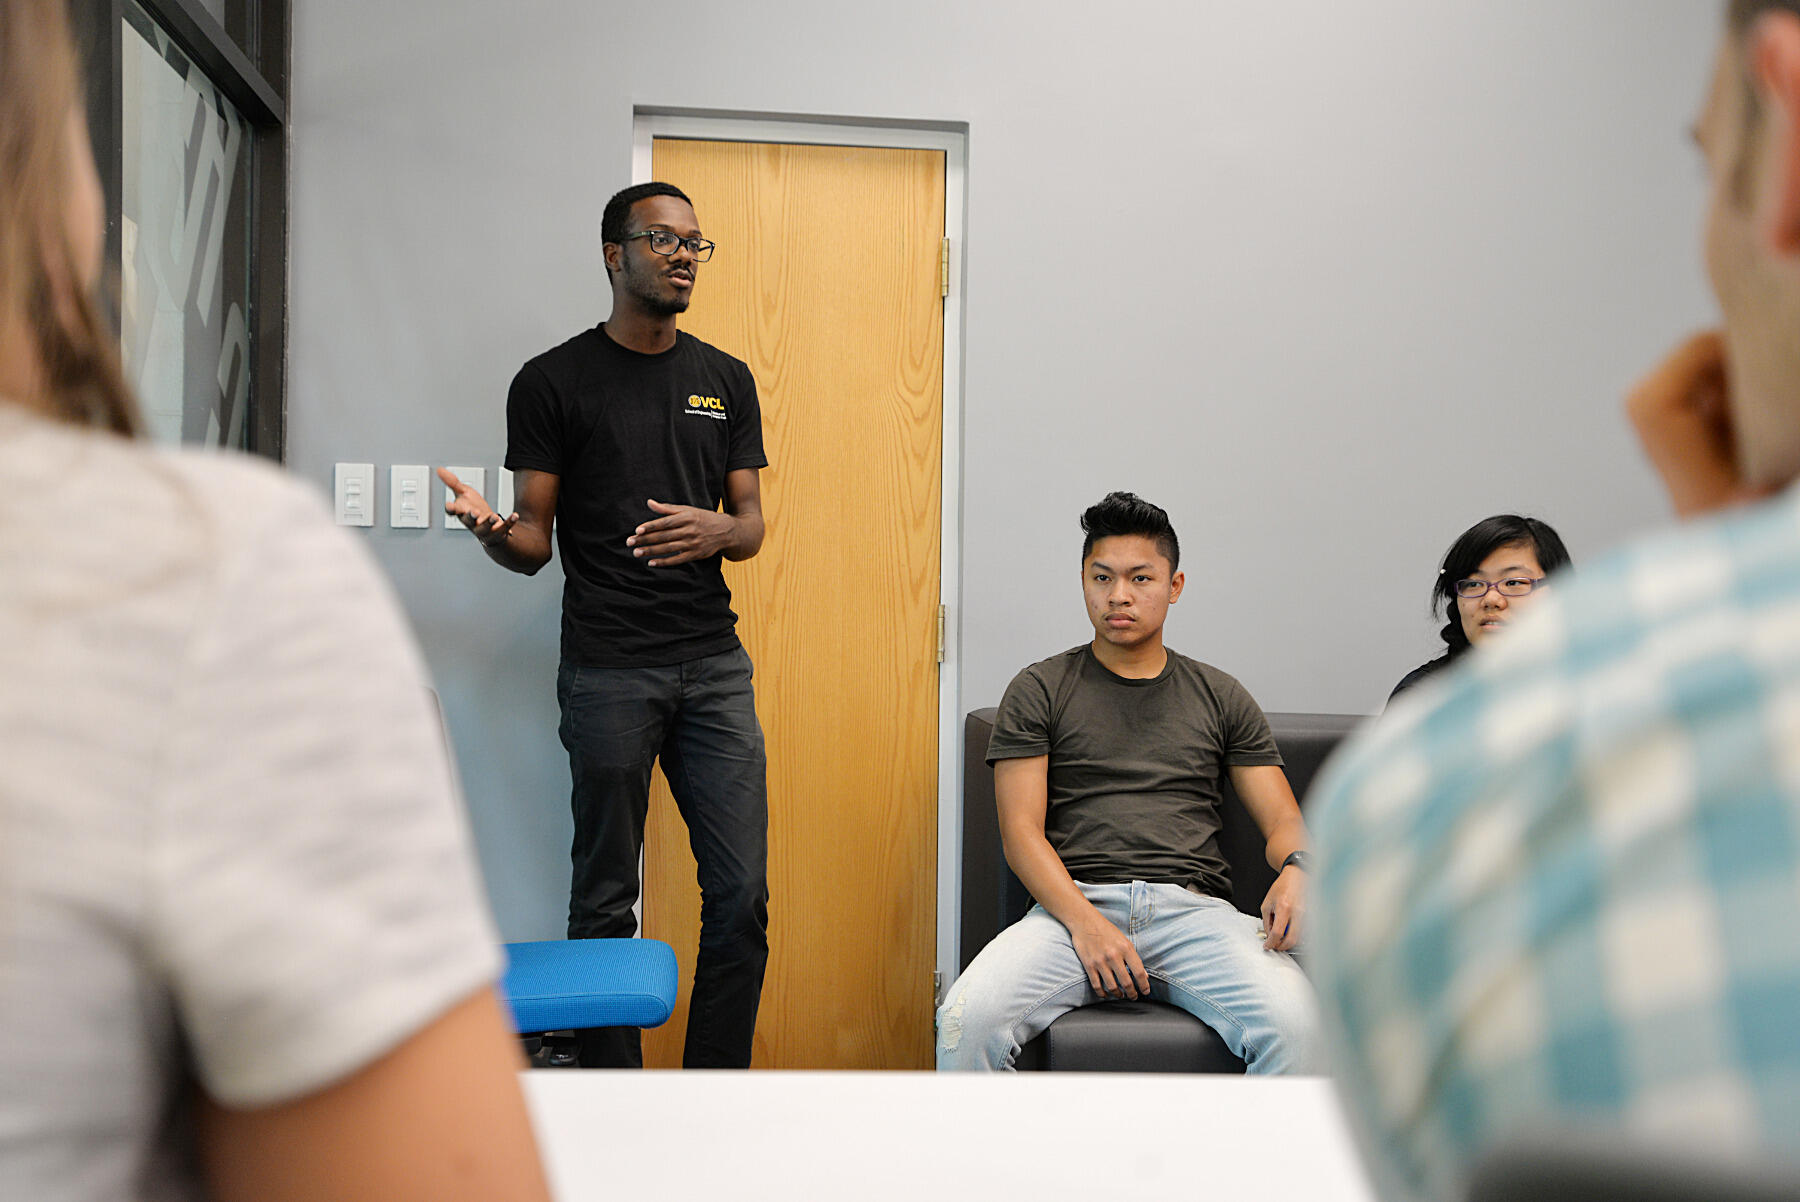 VCU computer science student Zuriel Ferguson pitched an app that would provide information about college courses.